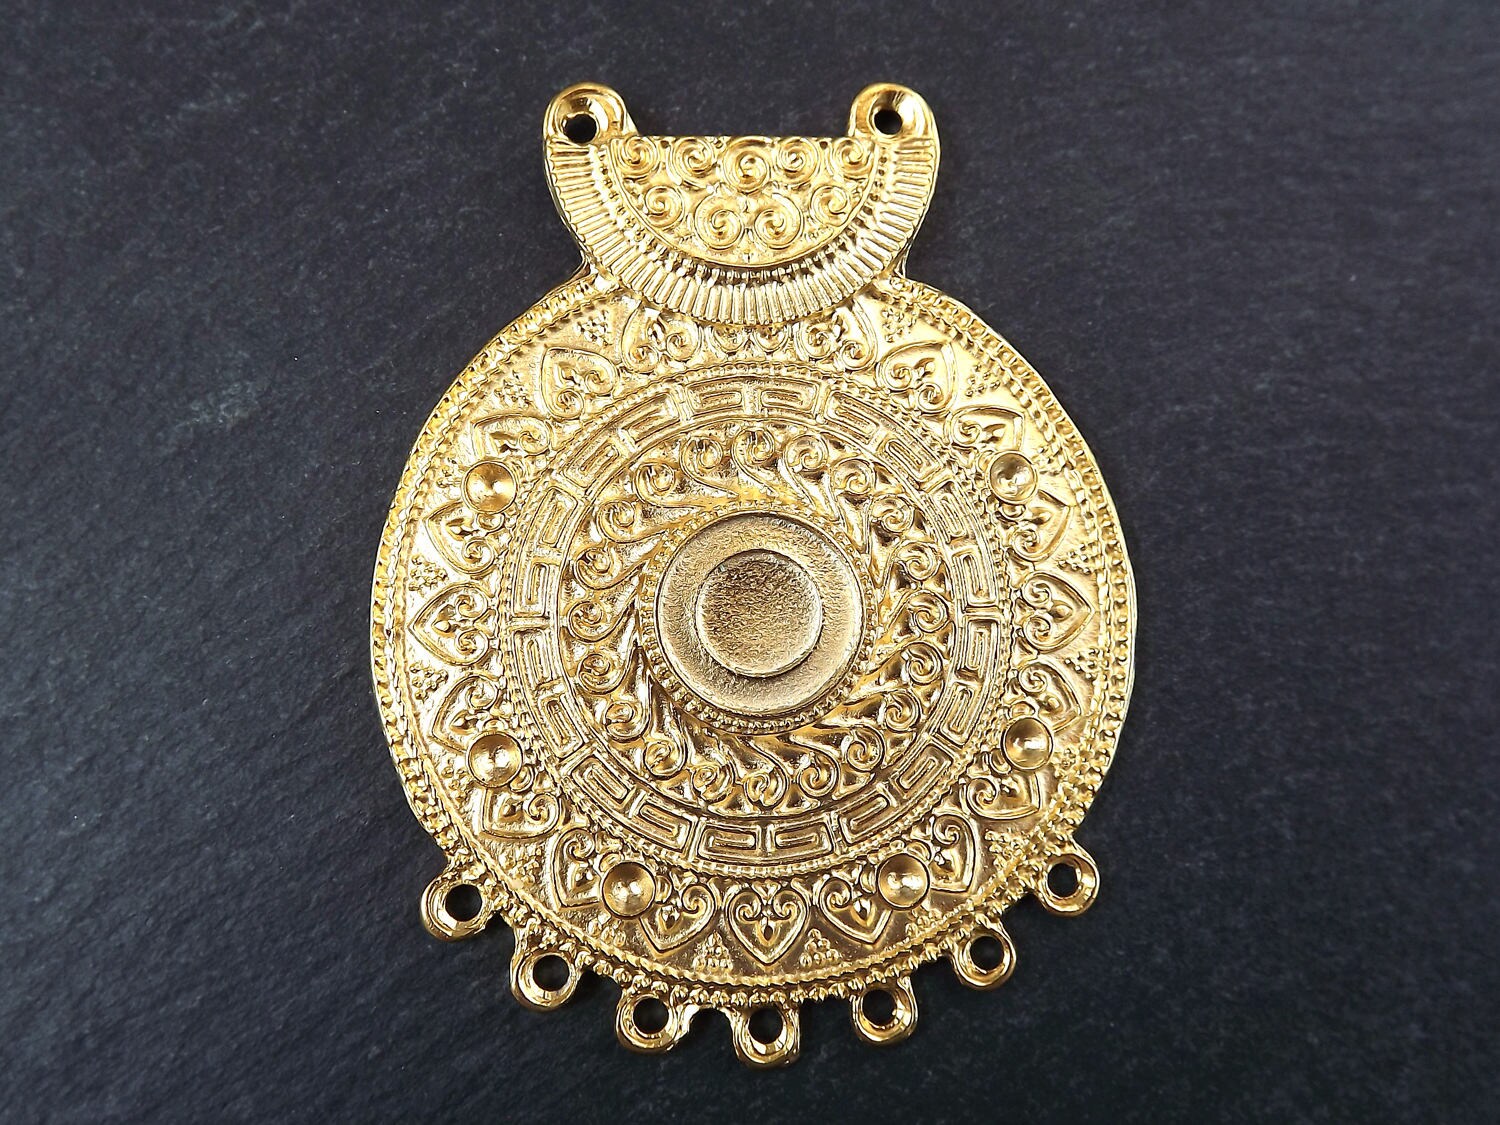 Large Tribal Pendant, Round Pendant, Rustic Pendant, Mandala Pendant, Ethnic Pendant, Gold Pendant, 7 Base Loops, 22k Matte Gold Plated 1PC